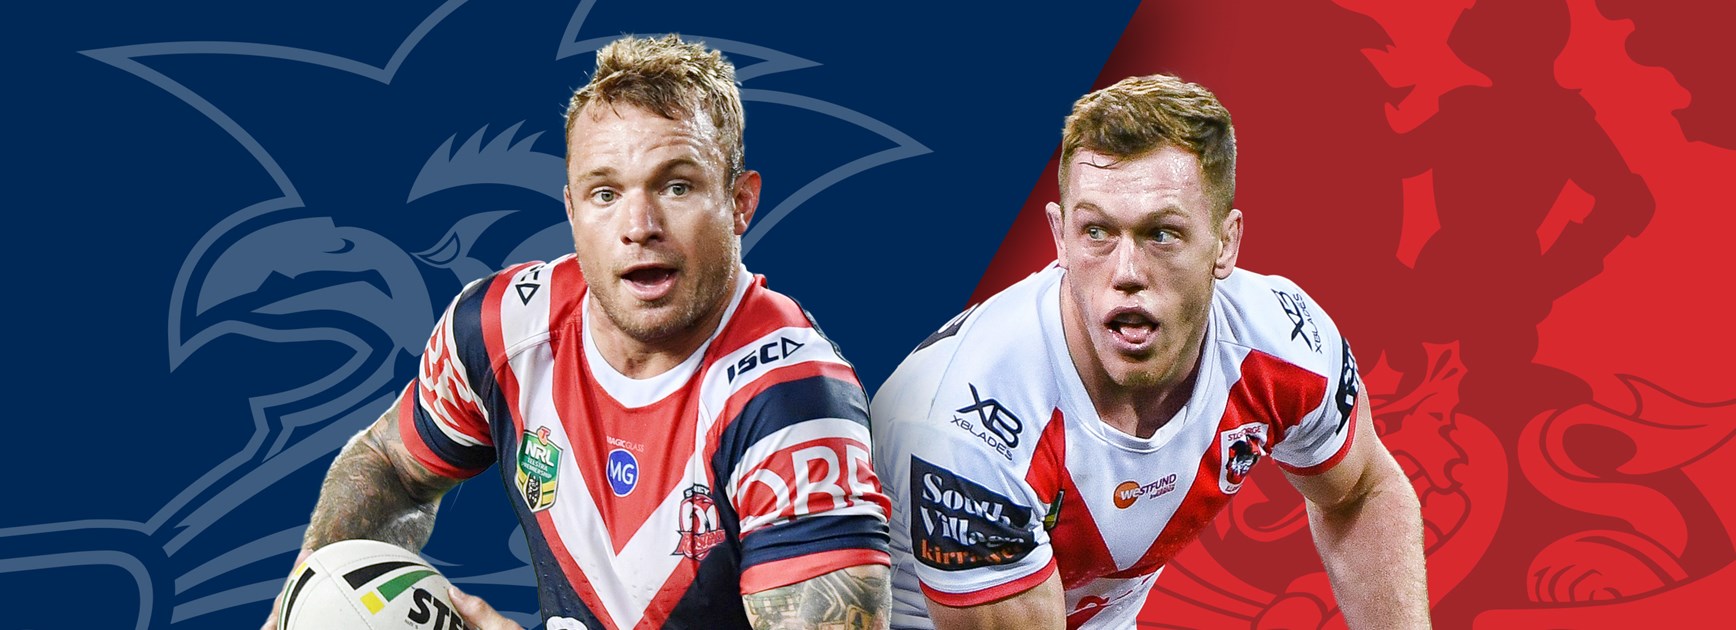 Roosters v Dragons: Liu to start; Frizzell return